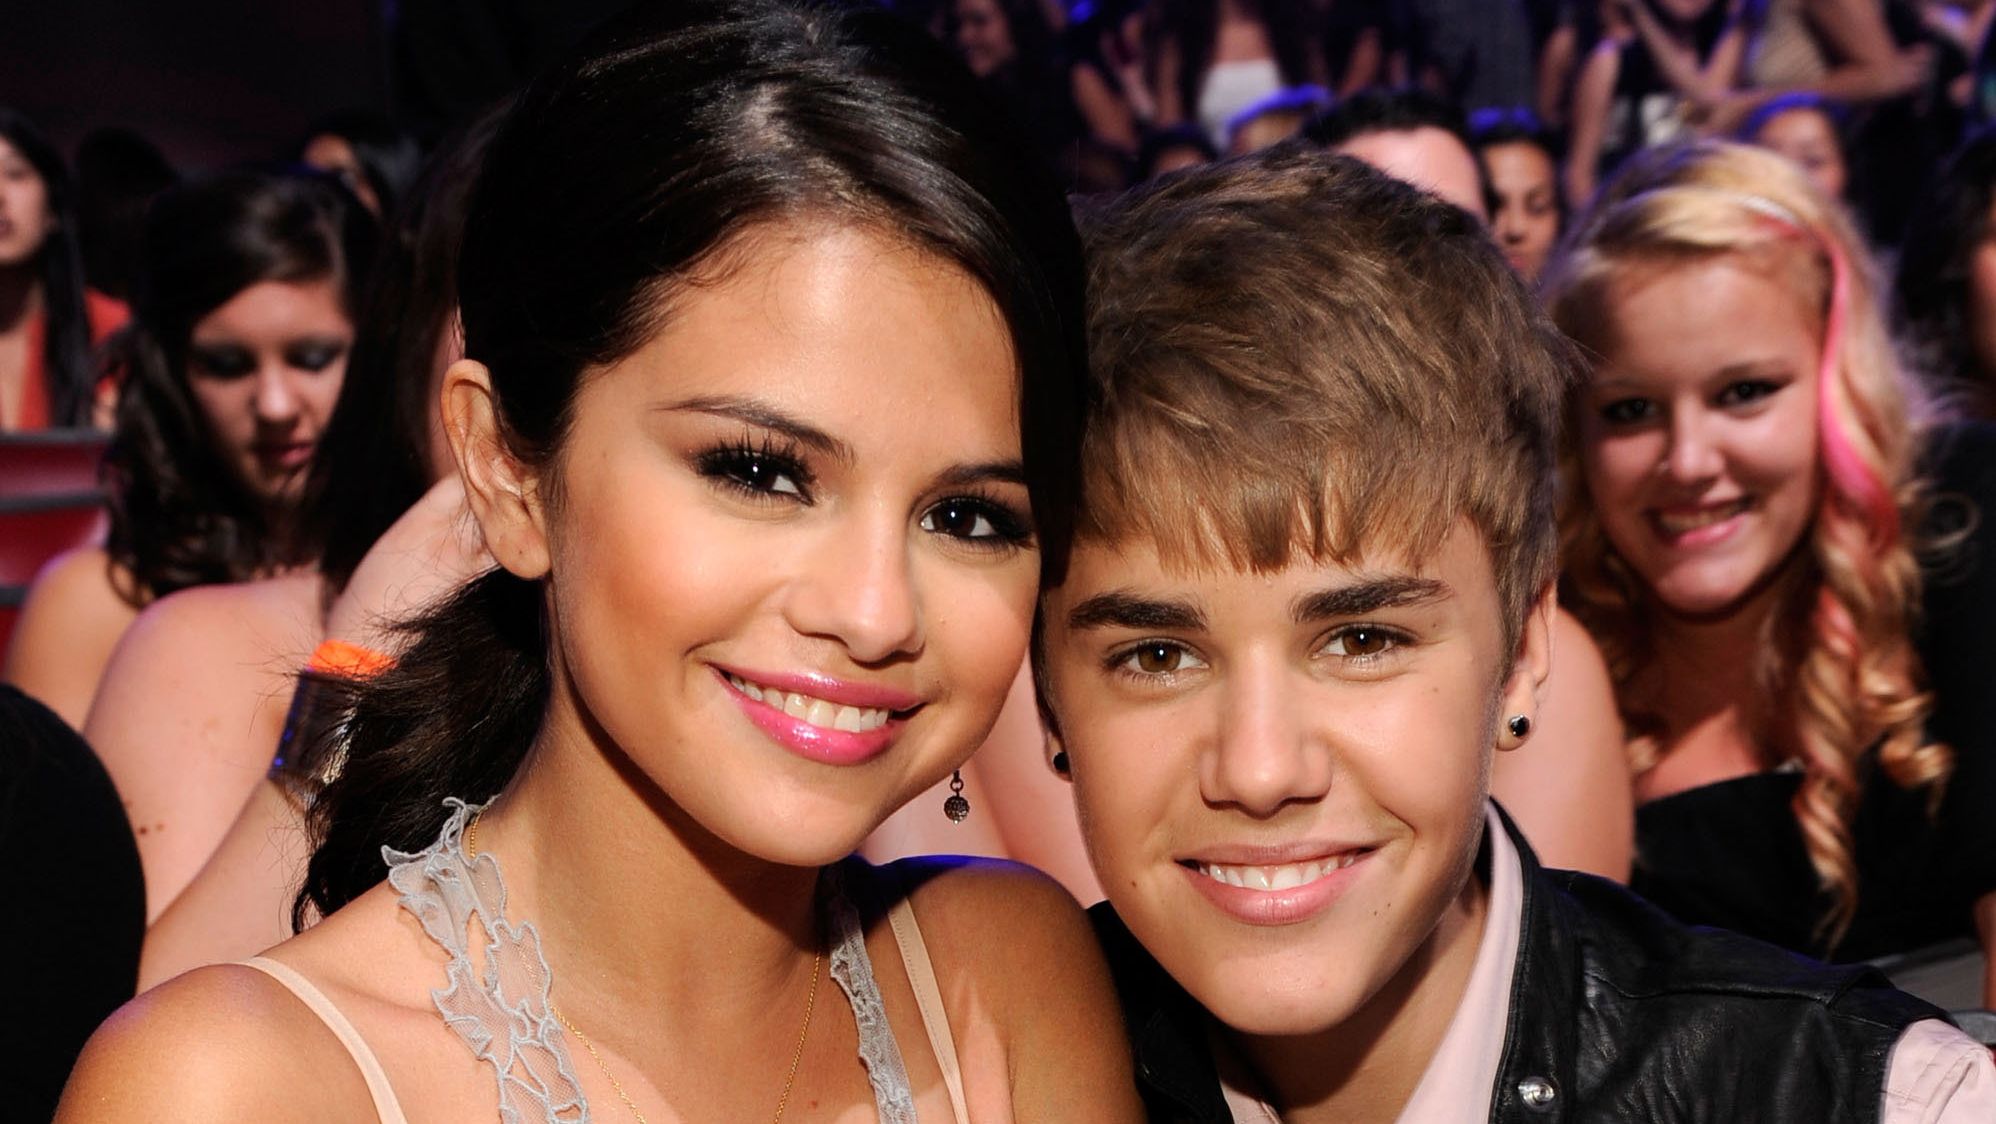 Justin Bieber & Selena Gomez's Same Answers For What You're Most